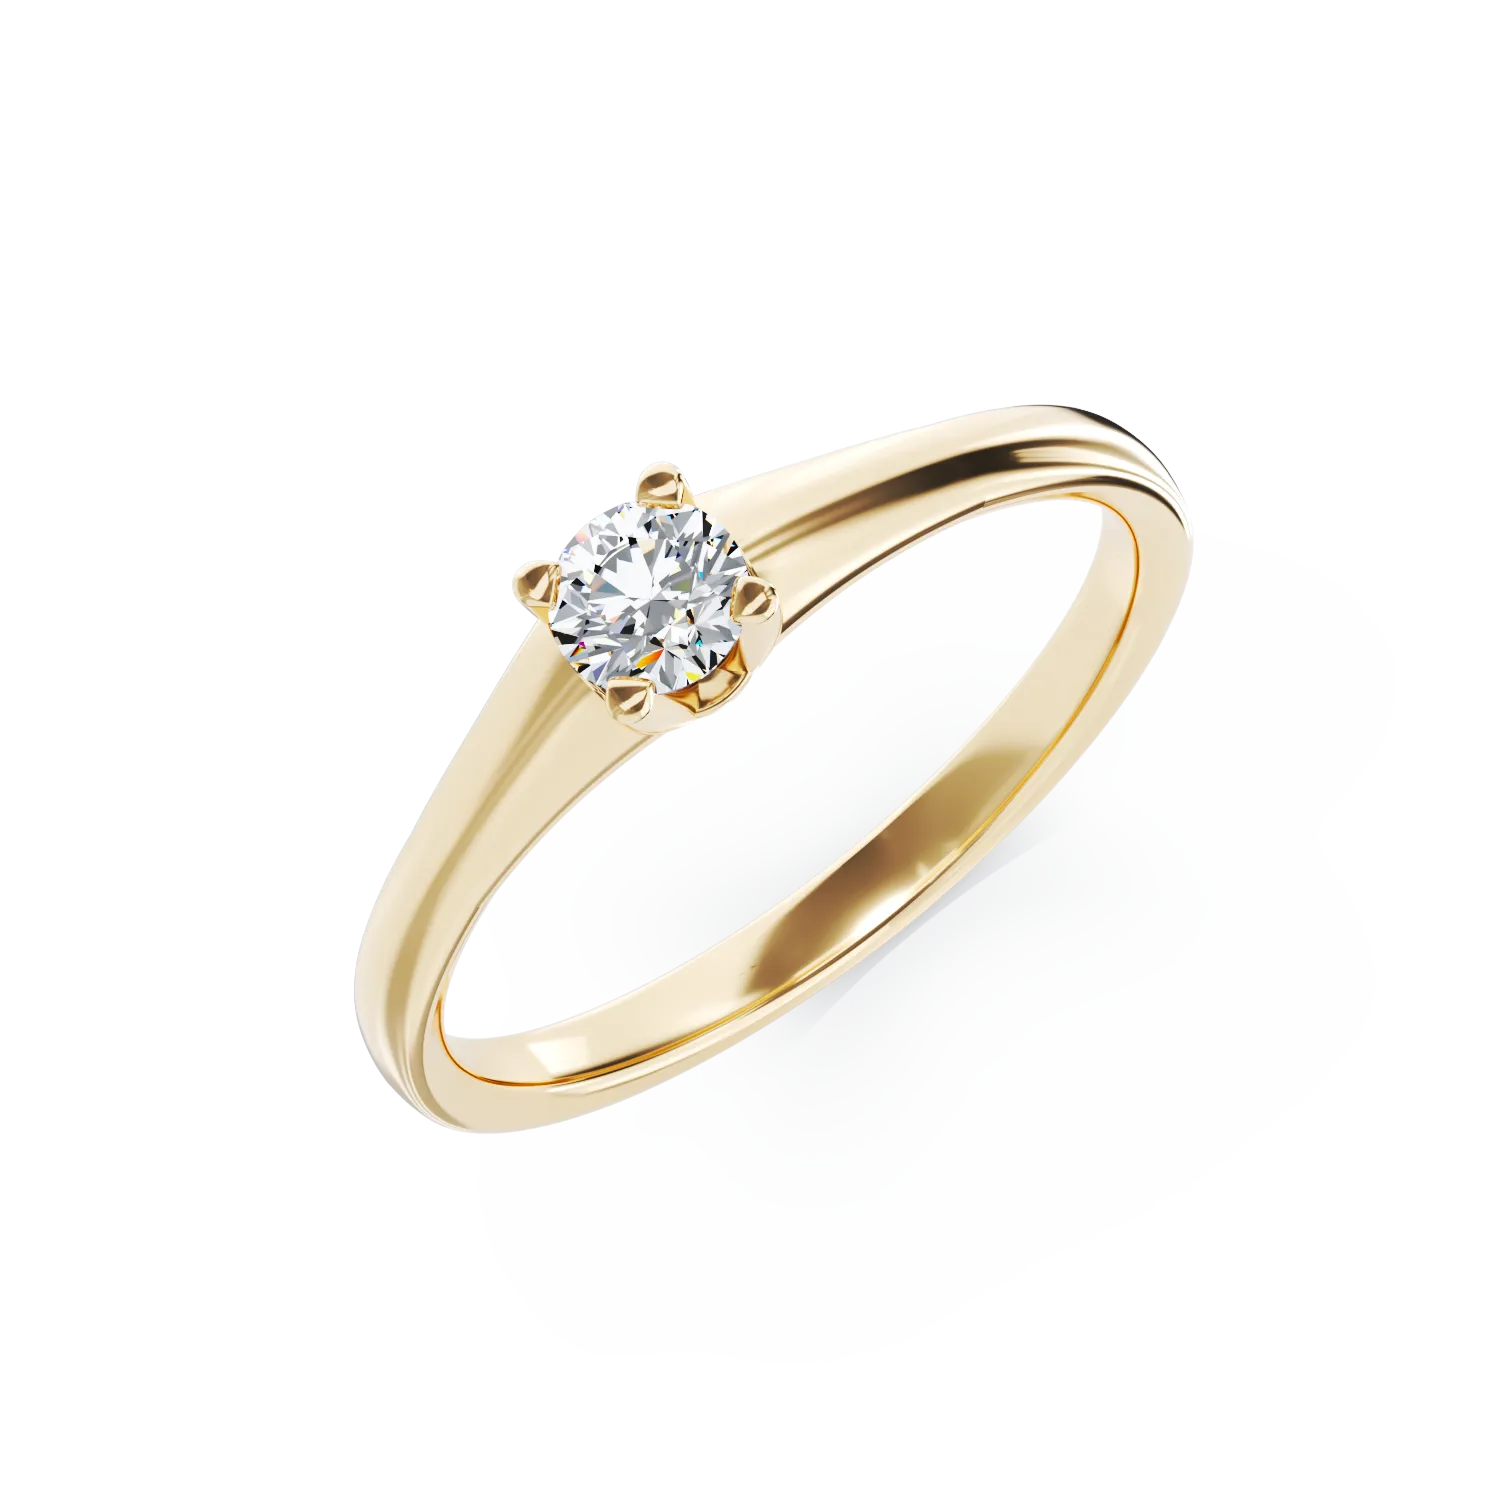 18K yellow gold engagement ring with a 0.19ct solitaire diamond